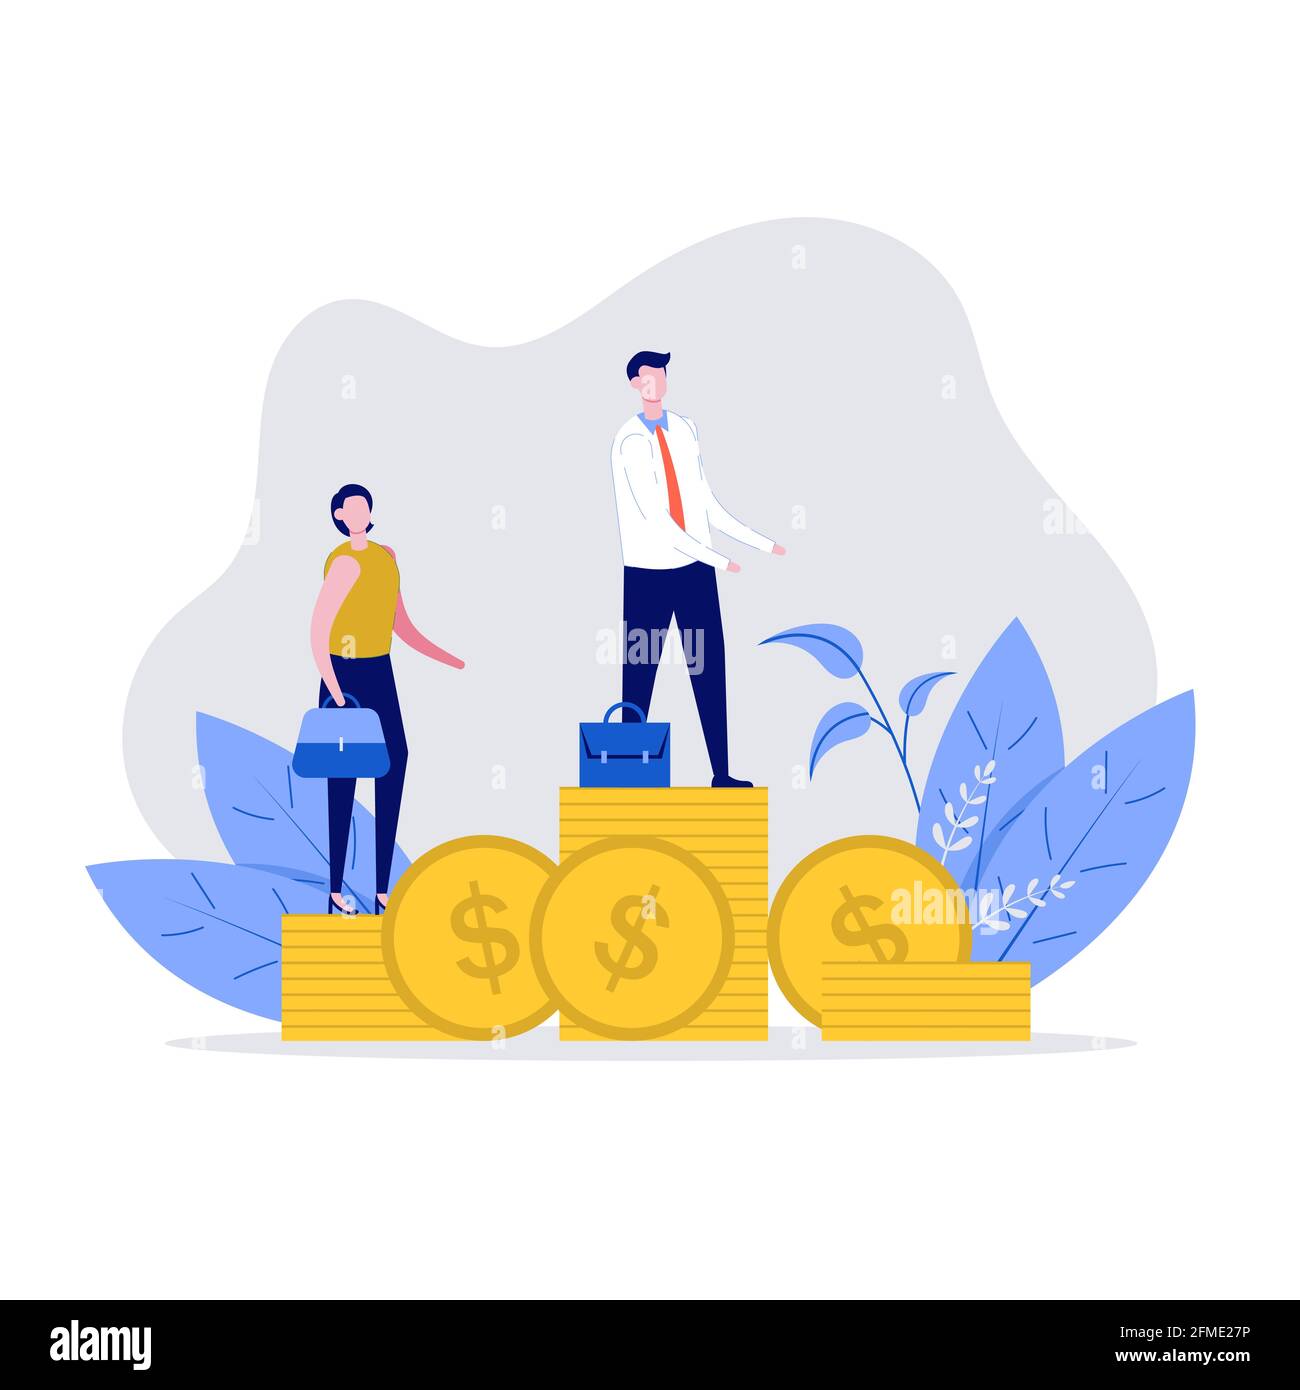 Businessman and businesswoman standing on stacks of coins representing wages level. Concept of Competition, Rivalry Between Colleagues, Office Workers Stock Vector